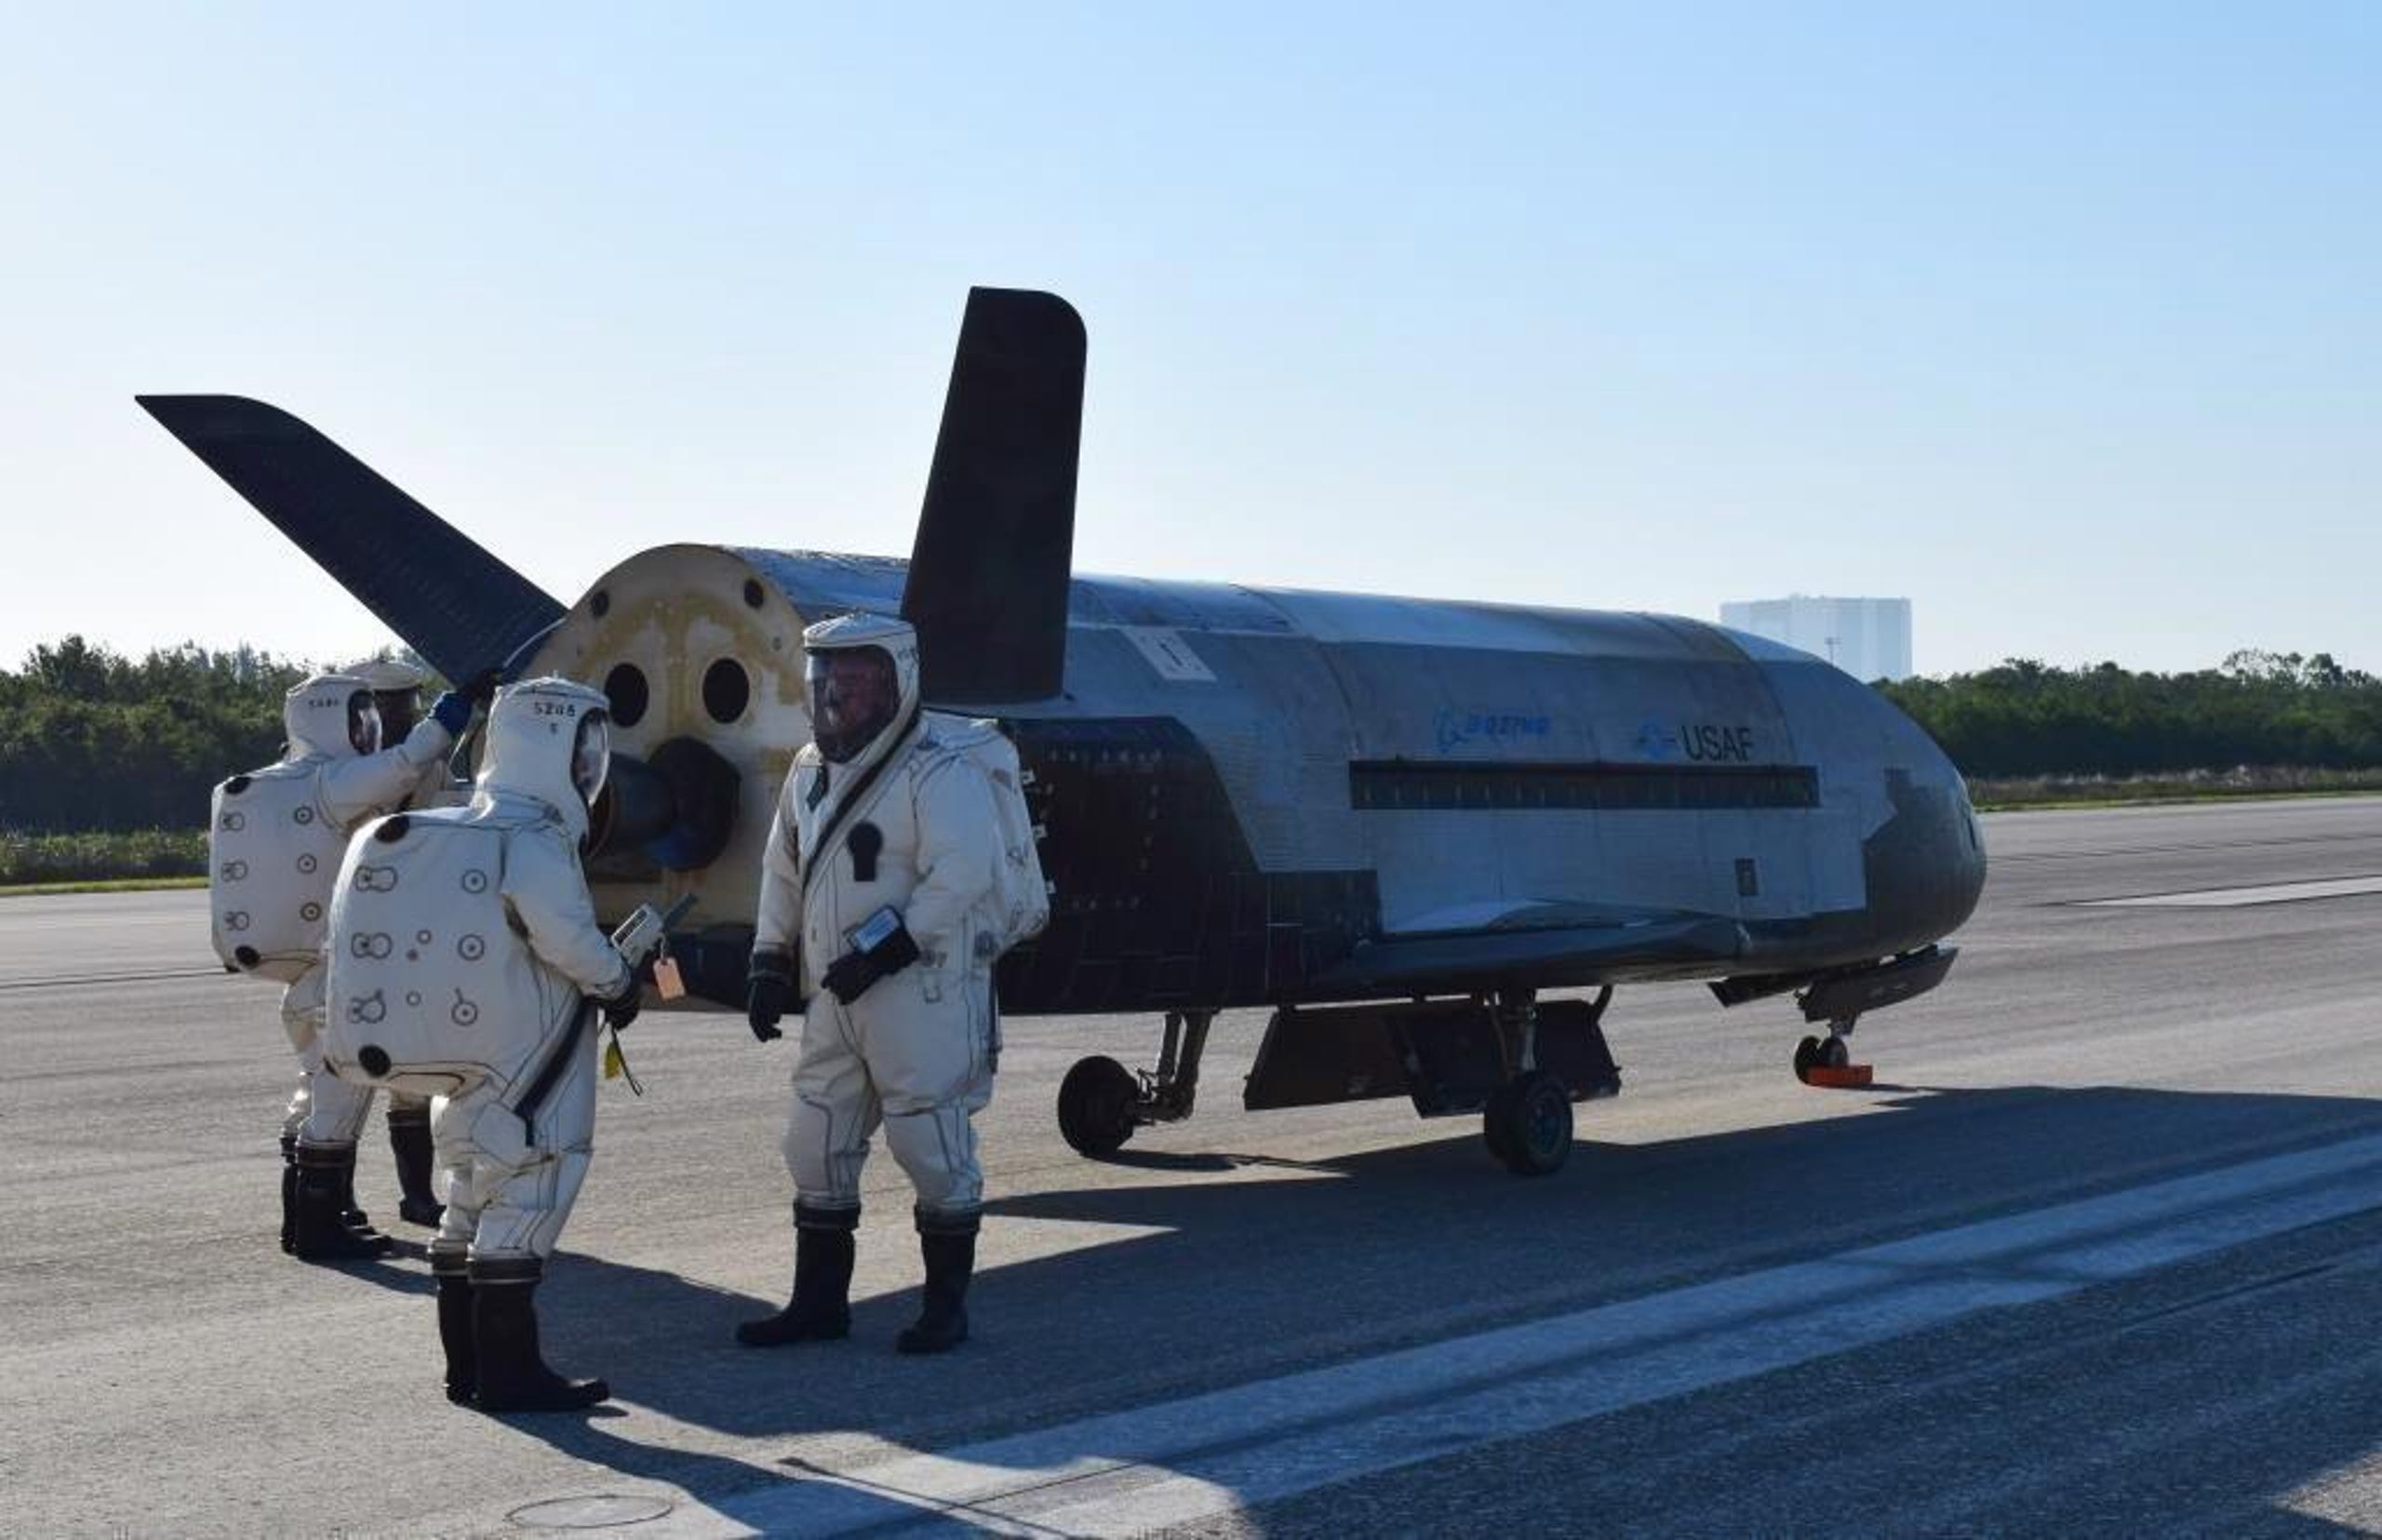 The X-37B Orbital Test Vehicle mission 4 after landing at NASA's Kennedy Space Center Shuttle Landing on May 7, 2017.